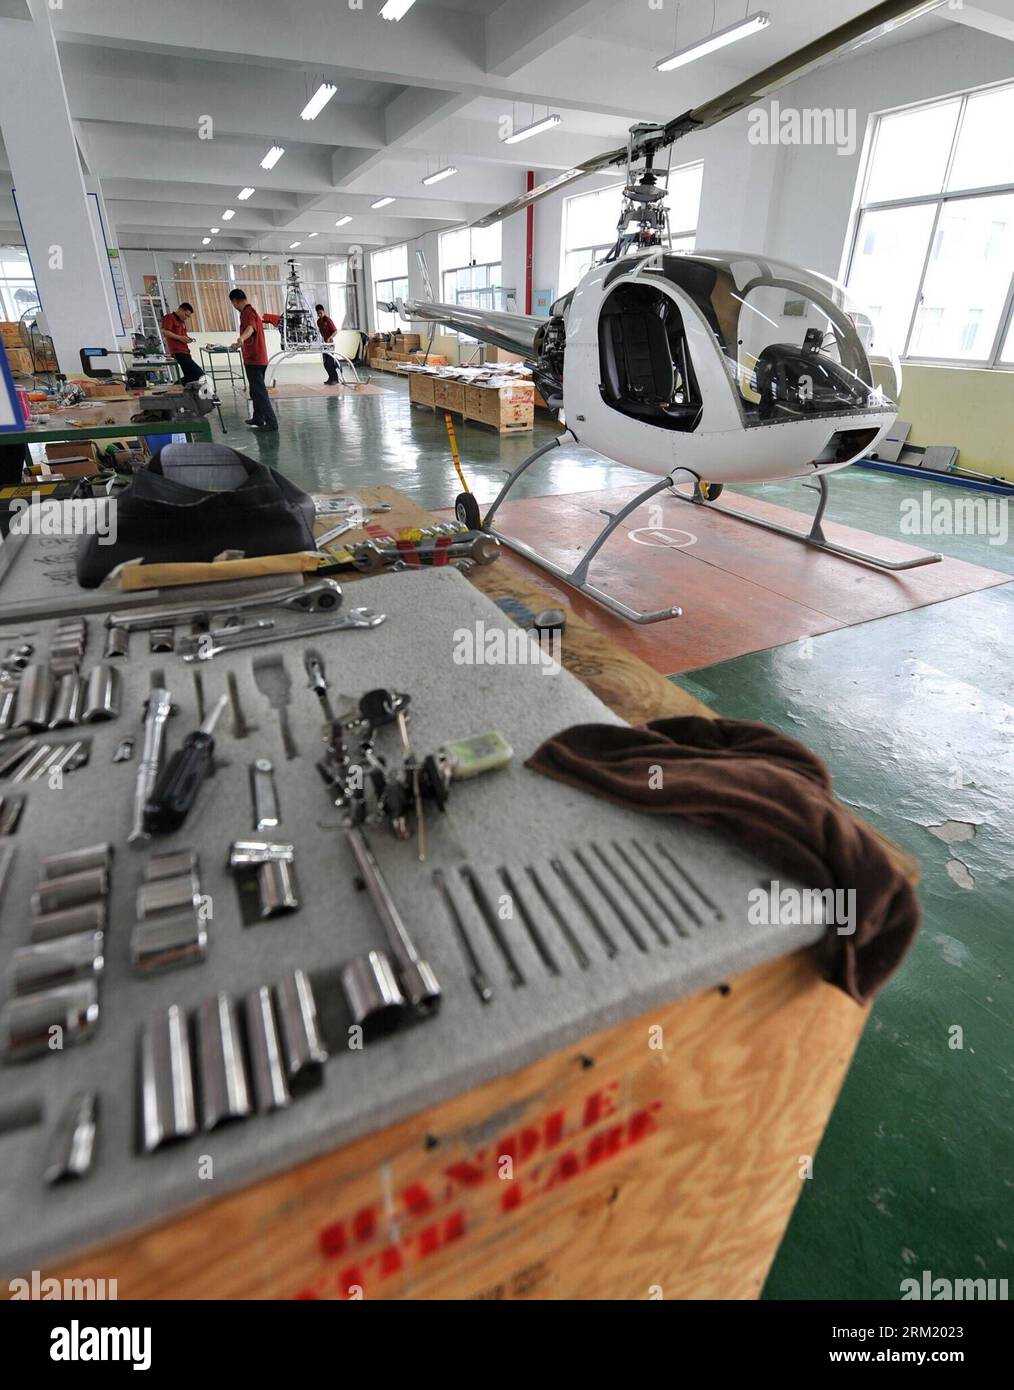 Bildnummer: 59656949  Datum: 15.05.2013  Copyright: imago/Xinhua  ZHUZHOU, May 15, 2013 -- Techinical workers assemble a RotorWay kit helicopeter in RotorWay China Co., Ltd in Zhuzhou, central China s Hunan Province, May 15, 2013. The first batch of RotorWay A600 kit helicopeters assembled in China have passed acceptance check. With a full tank of 64 liters of 97 gasoline, a China-assembled A600 helicopeter, priced 1.18 million yuan (192,104 US dollars), has an endurance of two hours. (Xinhua/Long Hongtao) (lfj) CHINA-HUNAN-ROTORWAY HELICOPTER-ASSEMBLING (CN) PUBLICATIONxNOTxINxCHN xcb x0x 201 Stock Photo